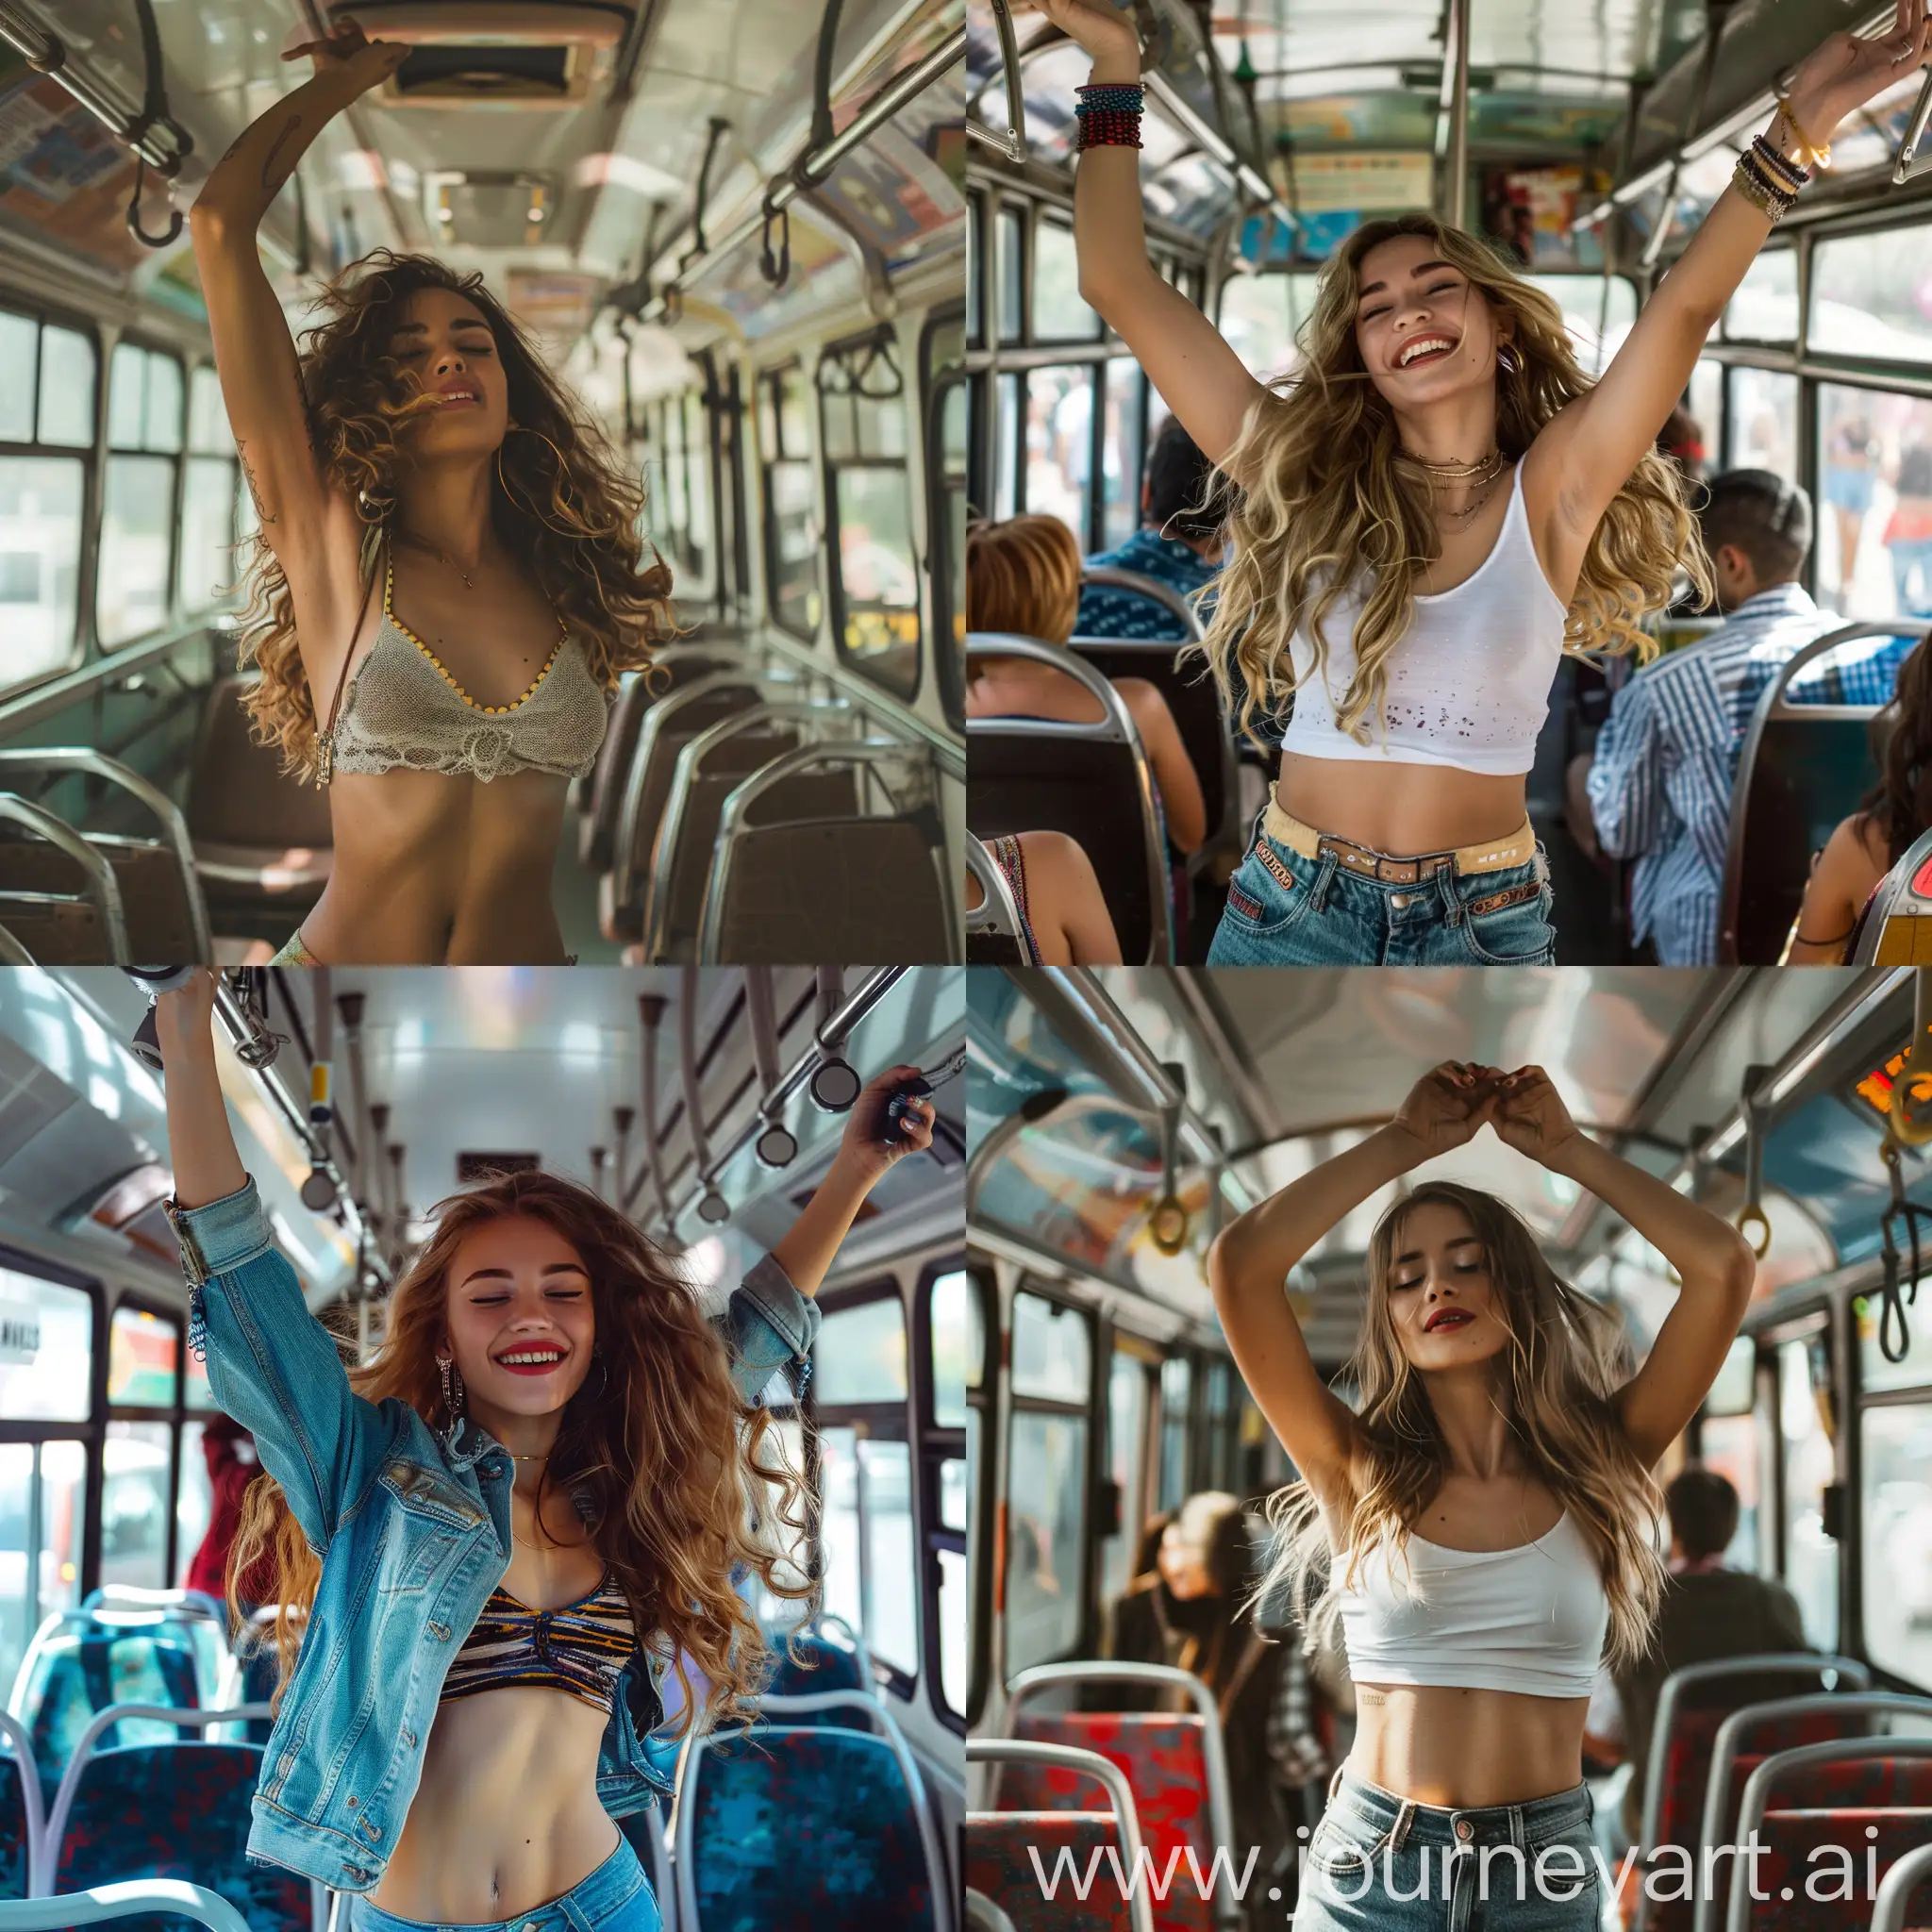 a real girl dancing in the bus